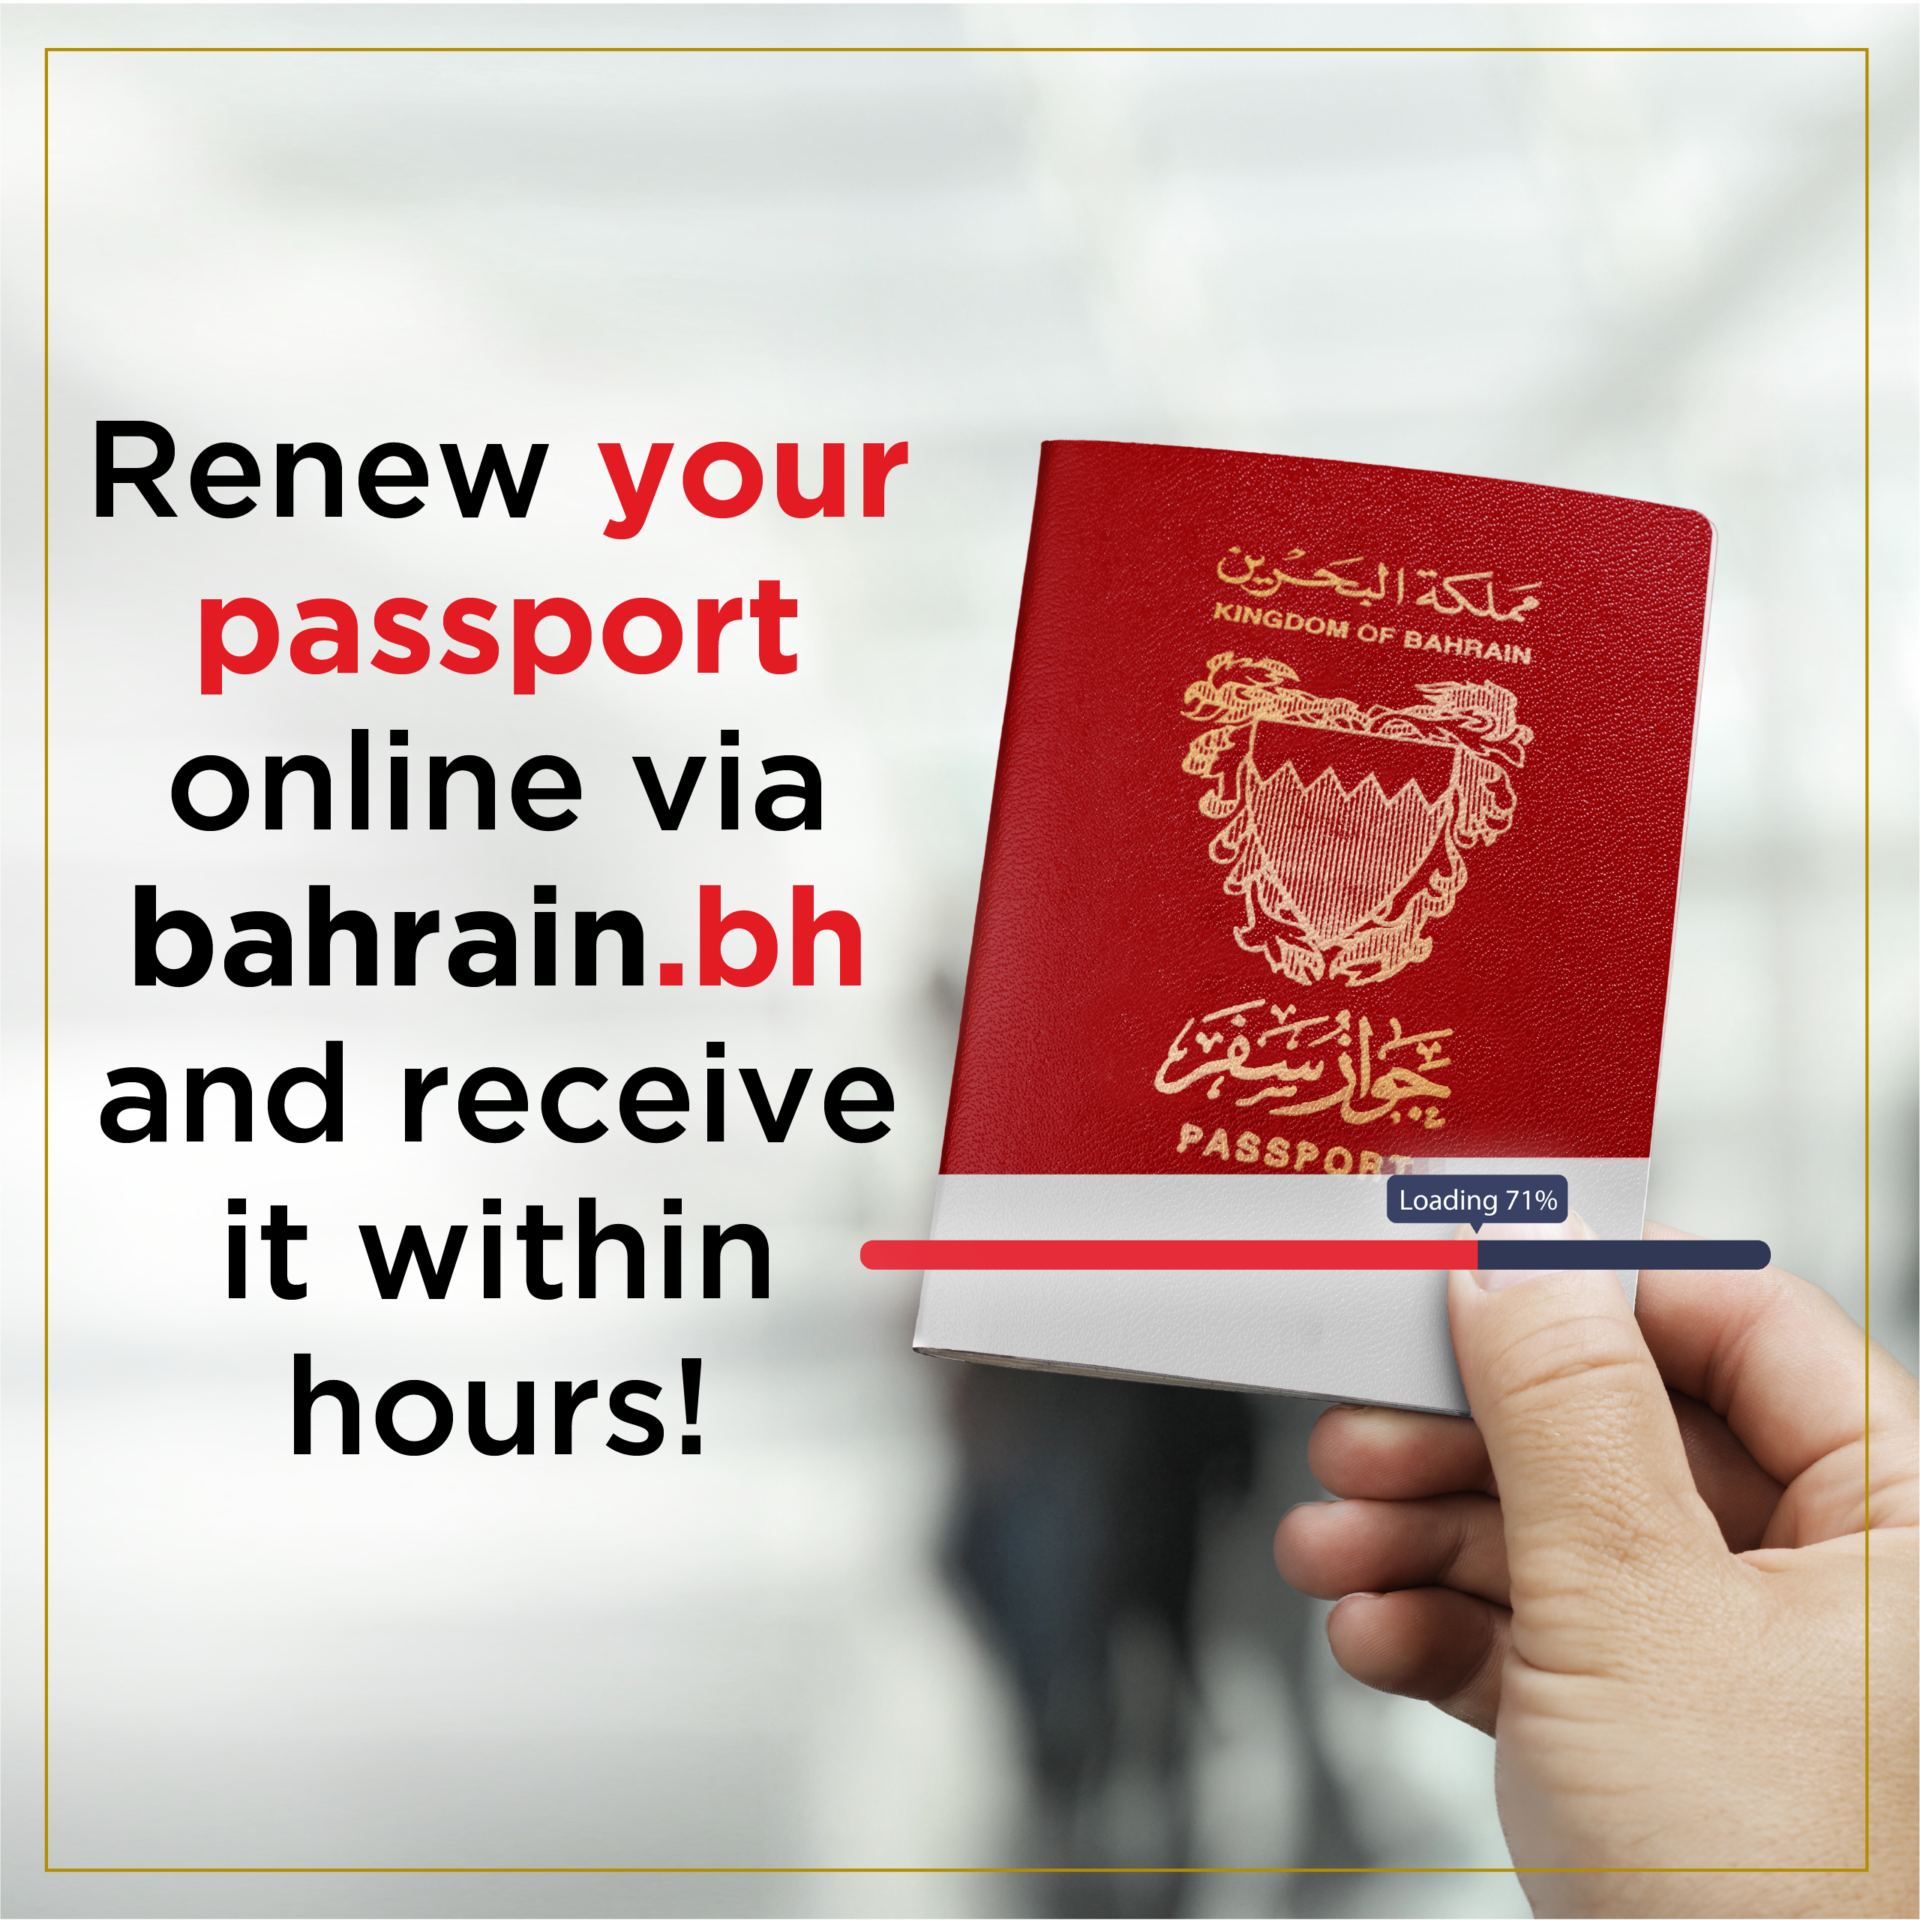 Renew Your Passport Online with Ease via Bahrain.bh!